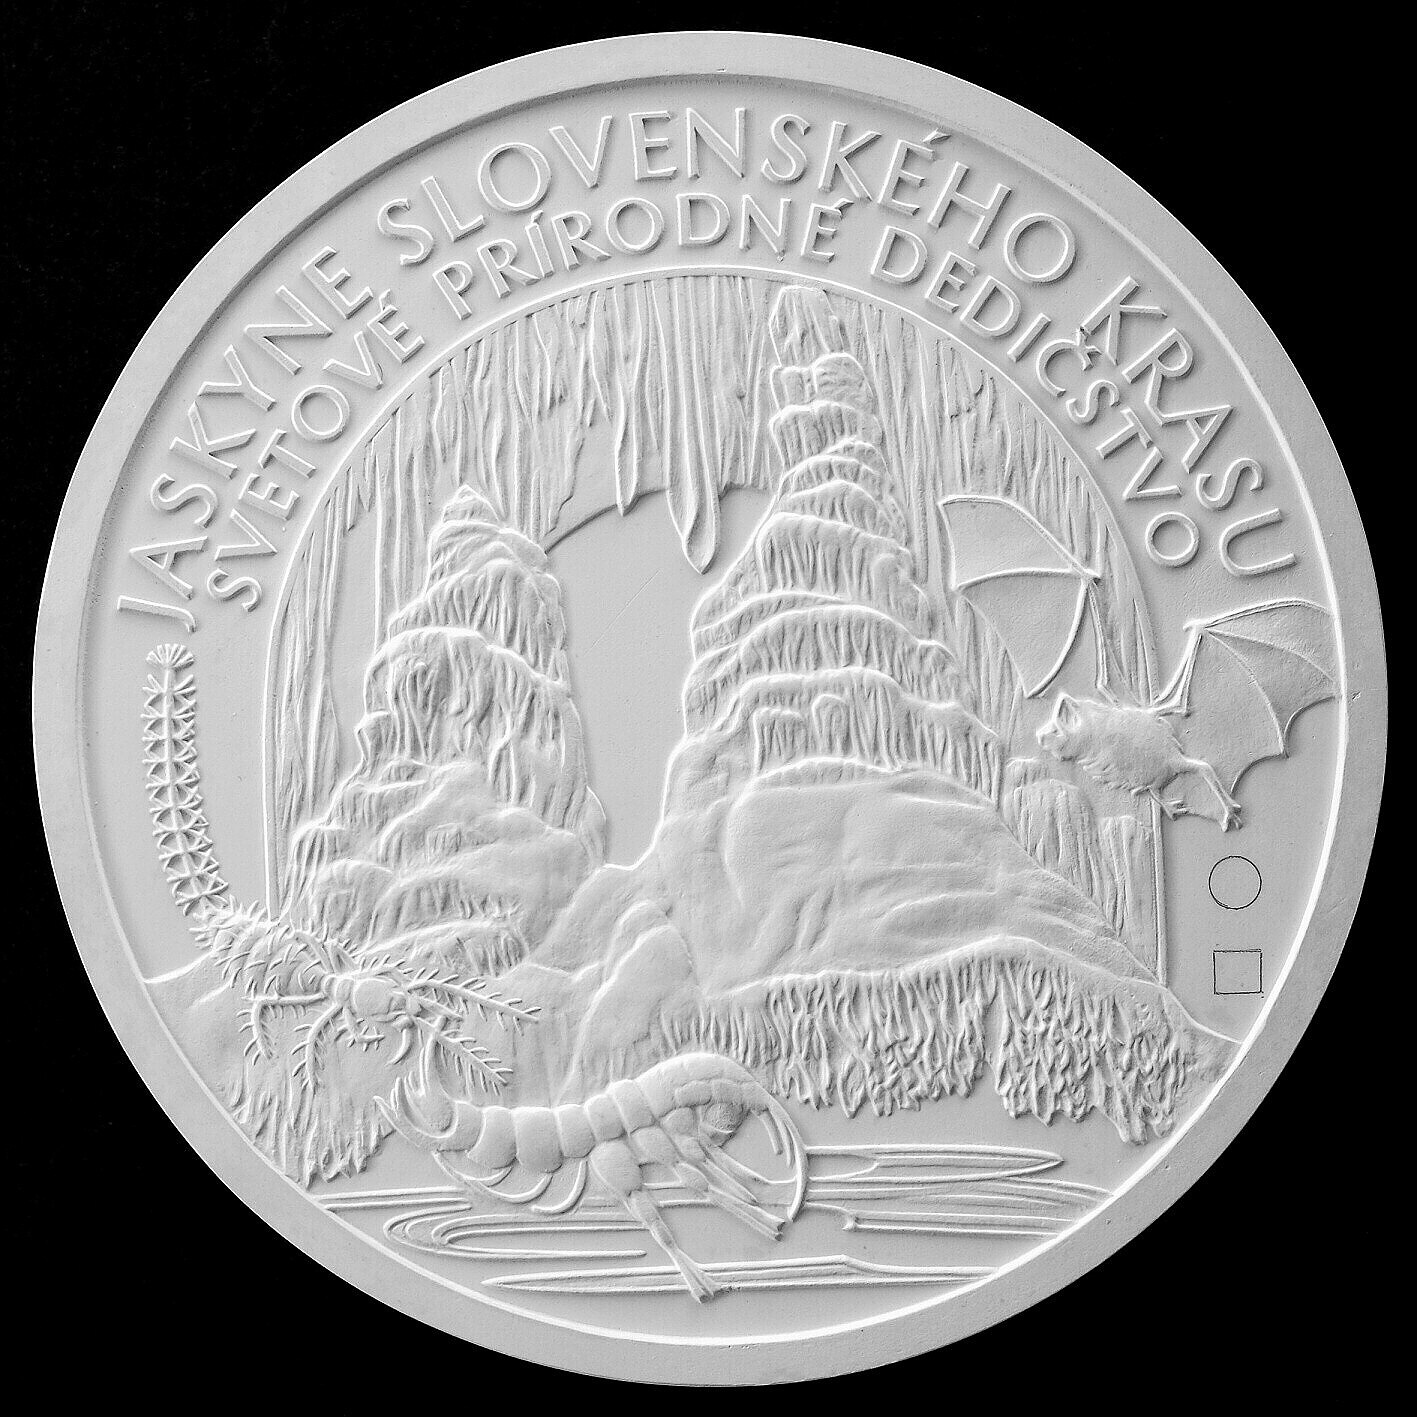 First prize (the design selected for the coin)